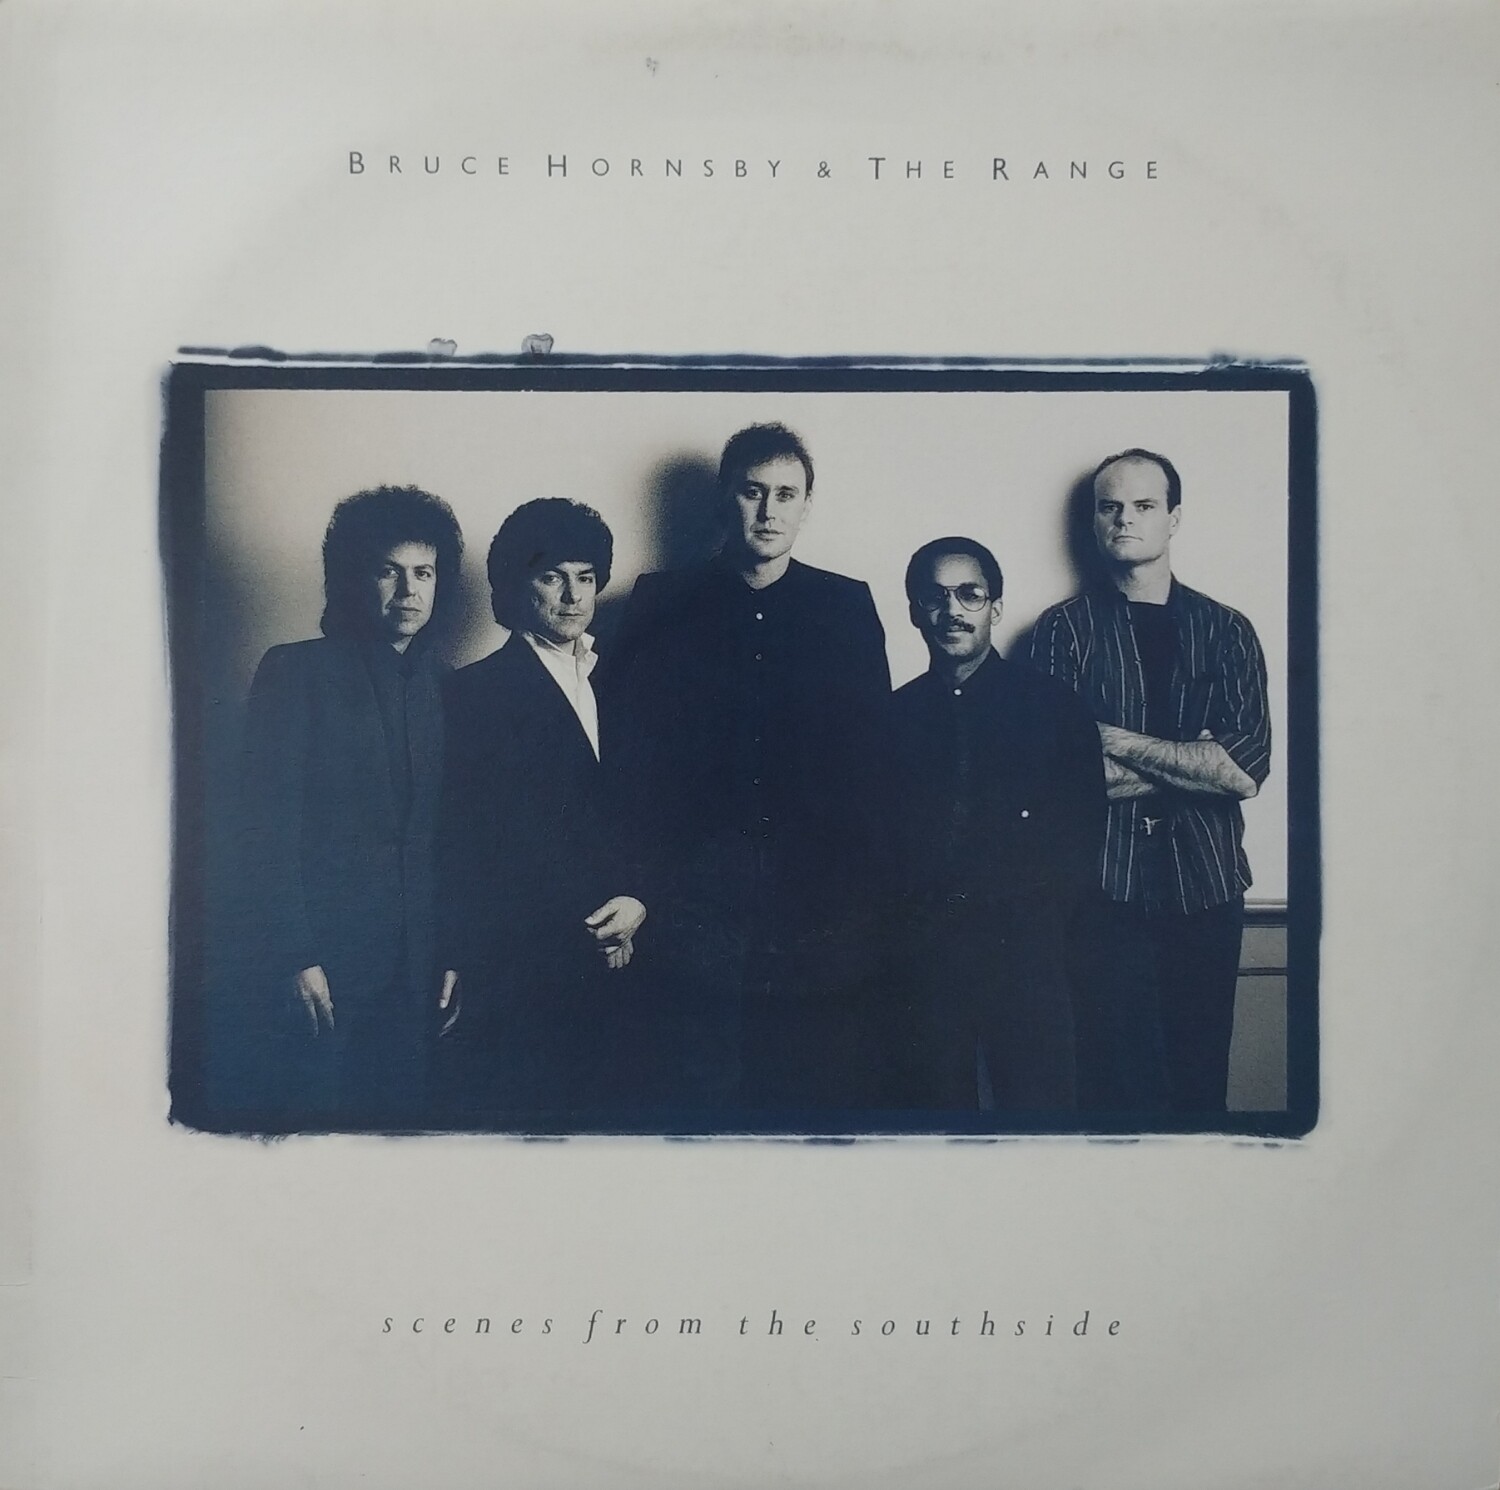 Bruce Hornsby & The Range - Scenes from the southside